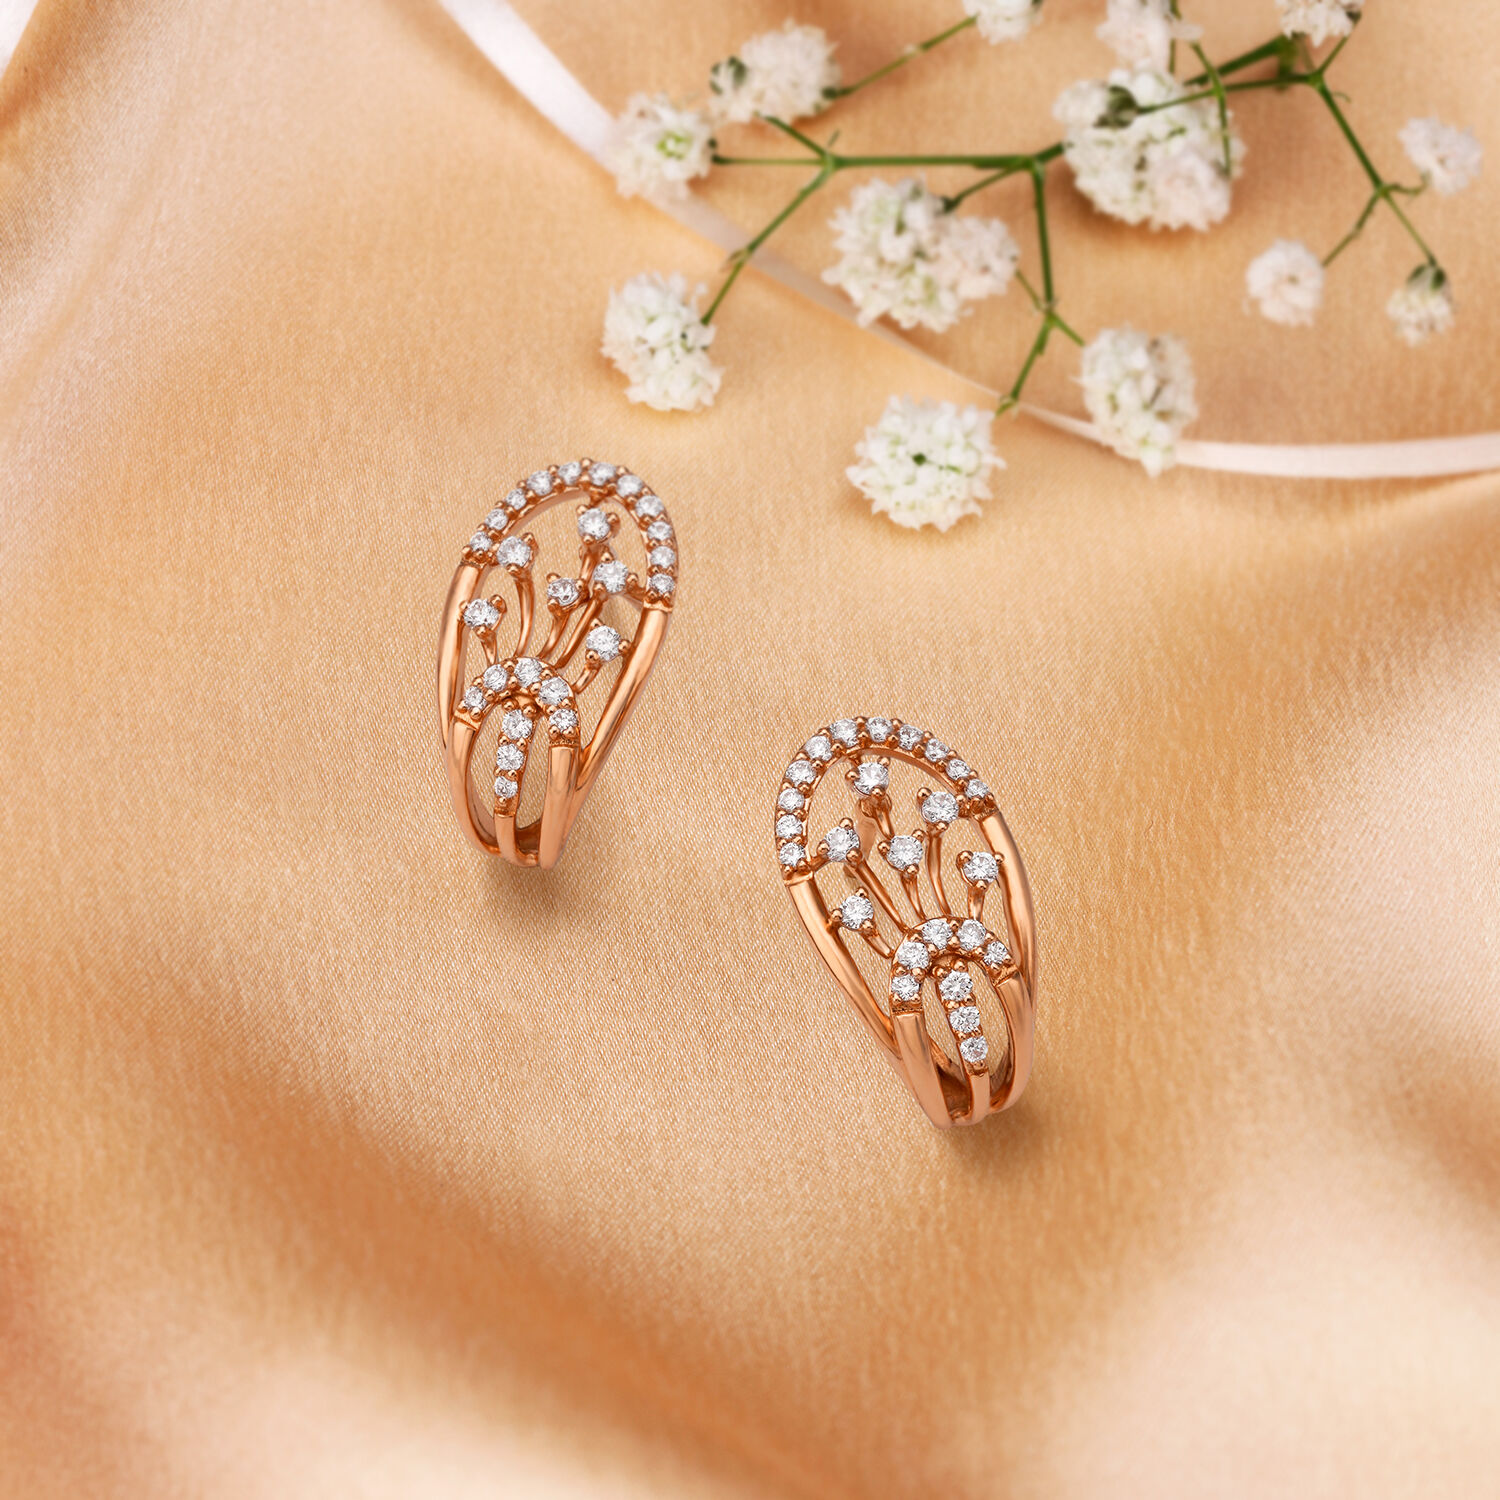 CaratLane: A Tanishq Partnership - Been waiting to try a trendy mismatched  earrings? How about you start with the star & moon! GET IT HERE:  bit.ly/2cRxiko or Call +91 9500190003 for details |